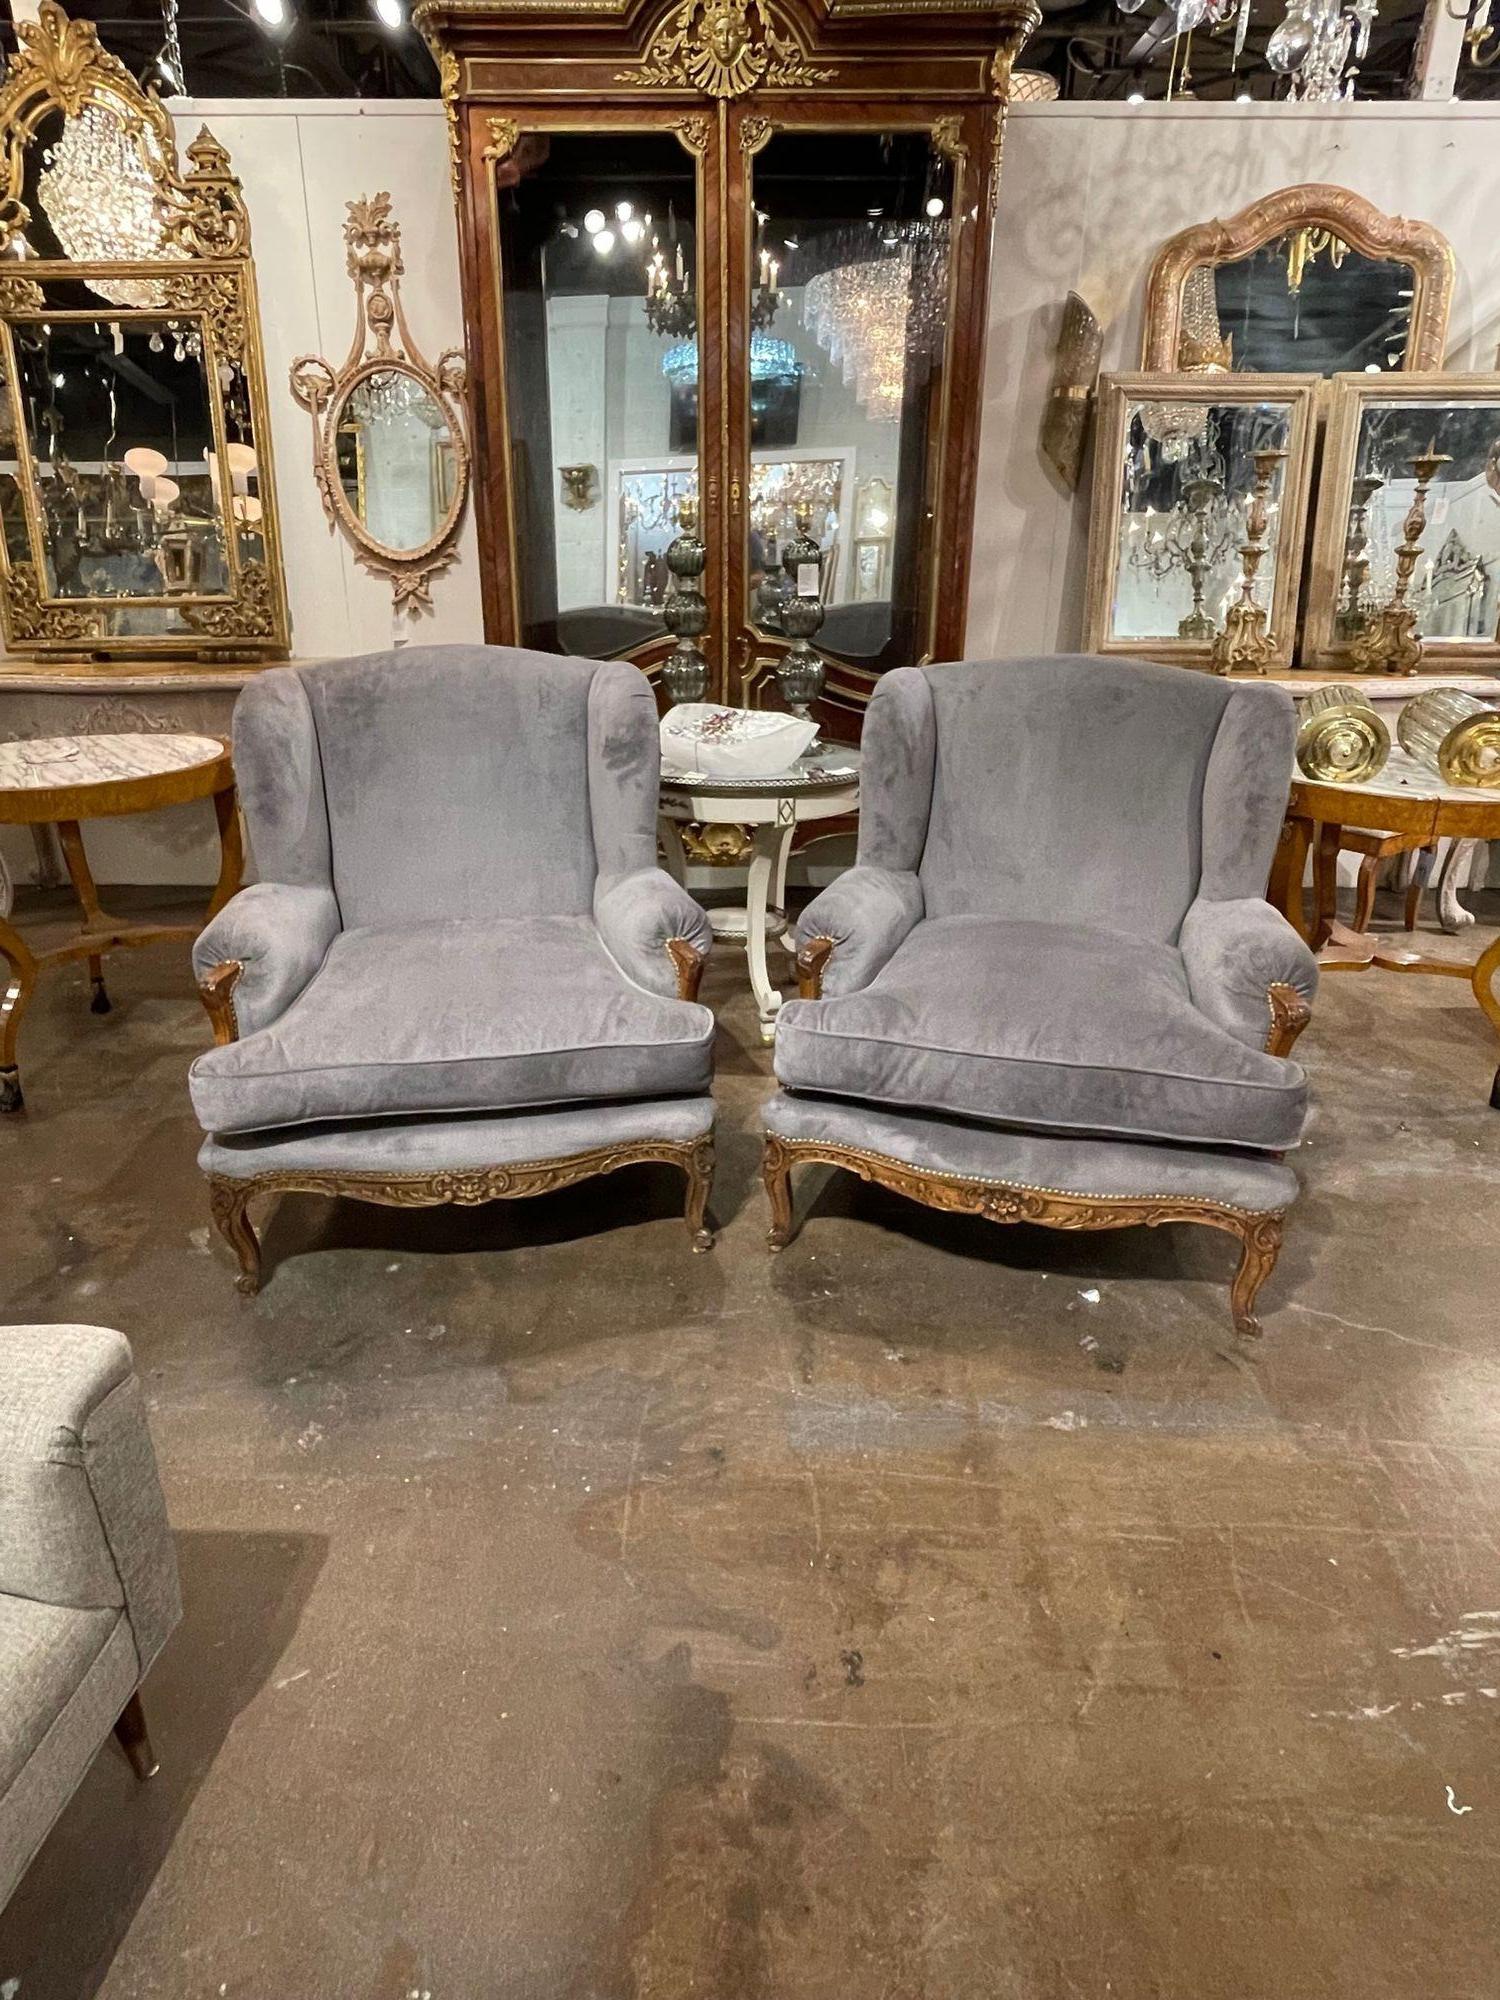 Gorgeous pair of 19th century French Provincial style Bergeres. Upholstered in a beautiful grey fabric. A very elegant pair that creates a very upscale look!!